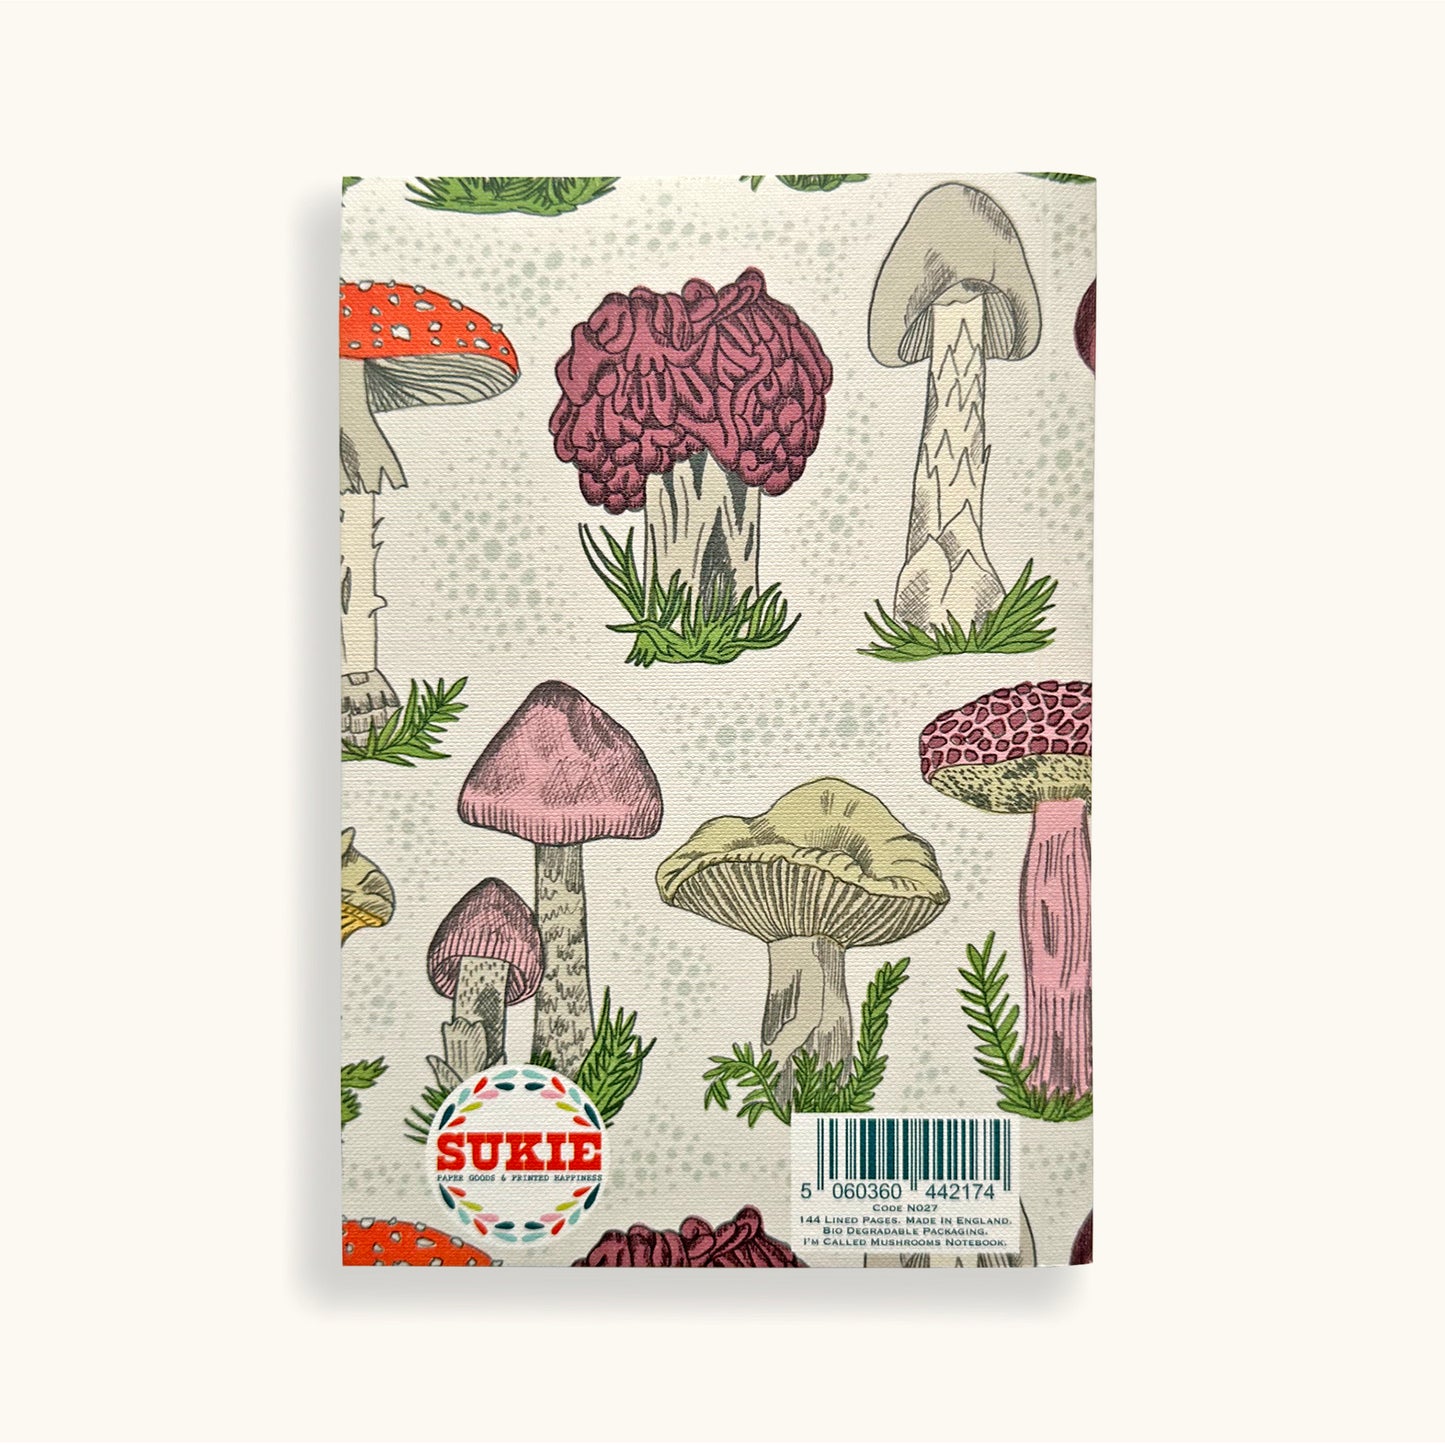 Personalised Notebook With Mushroom Cover - Sukie